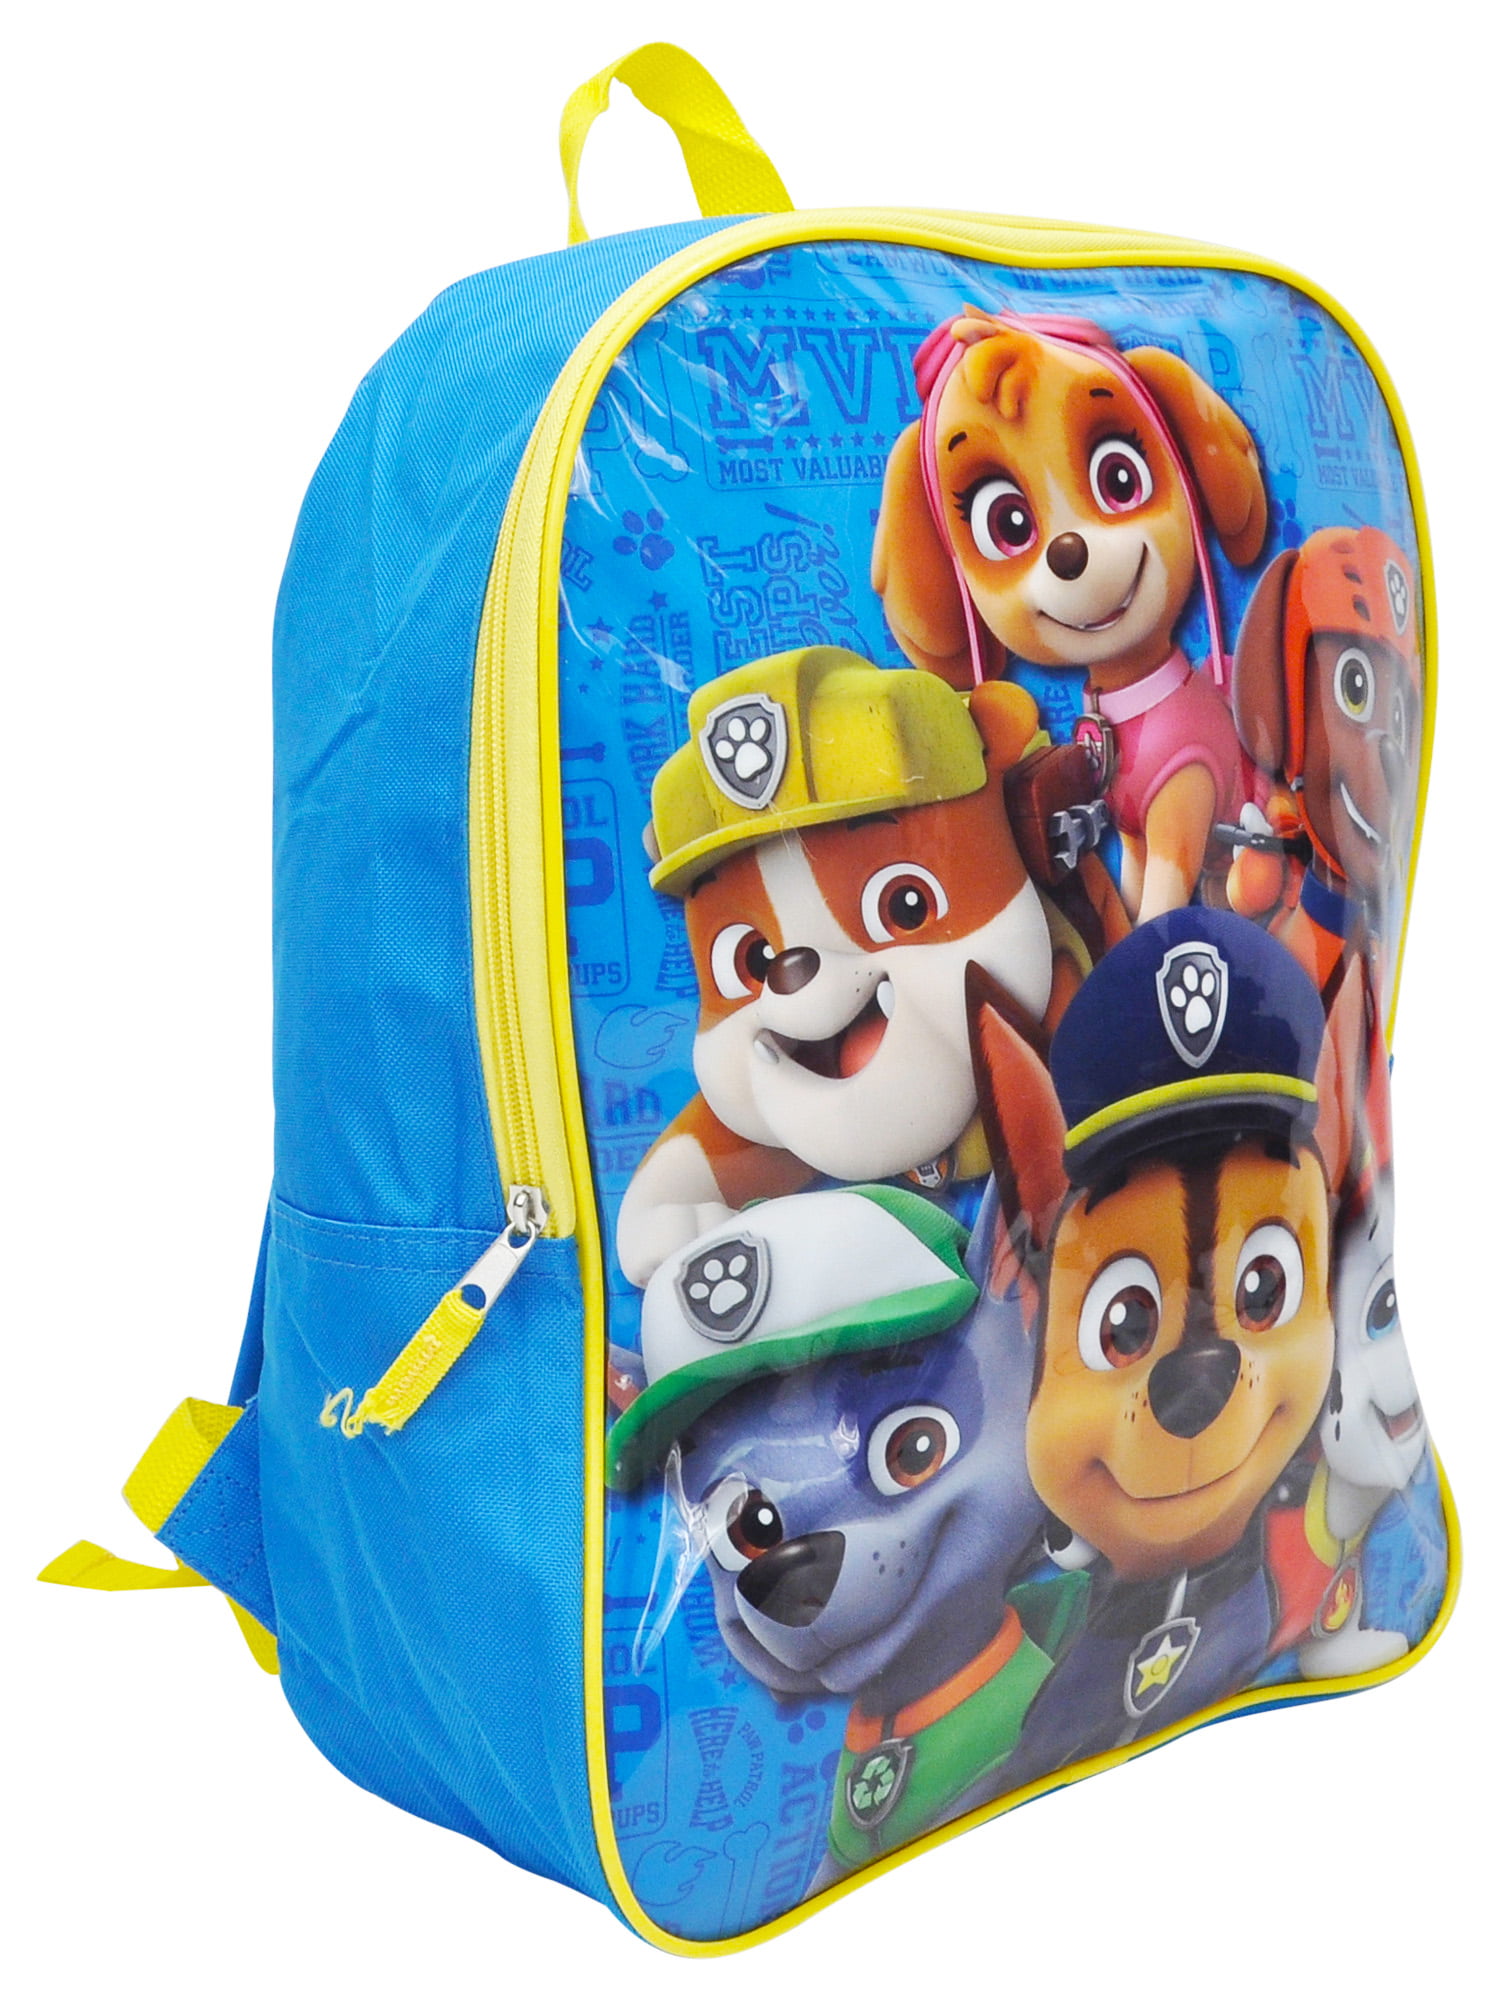 12/" inches BRAND NEW Licensed Product Paw Patrol Small Backpack